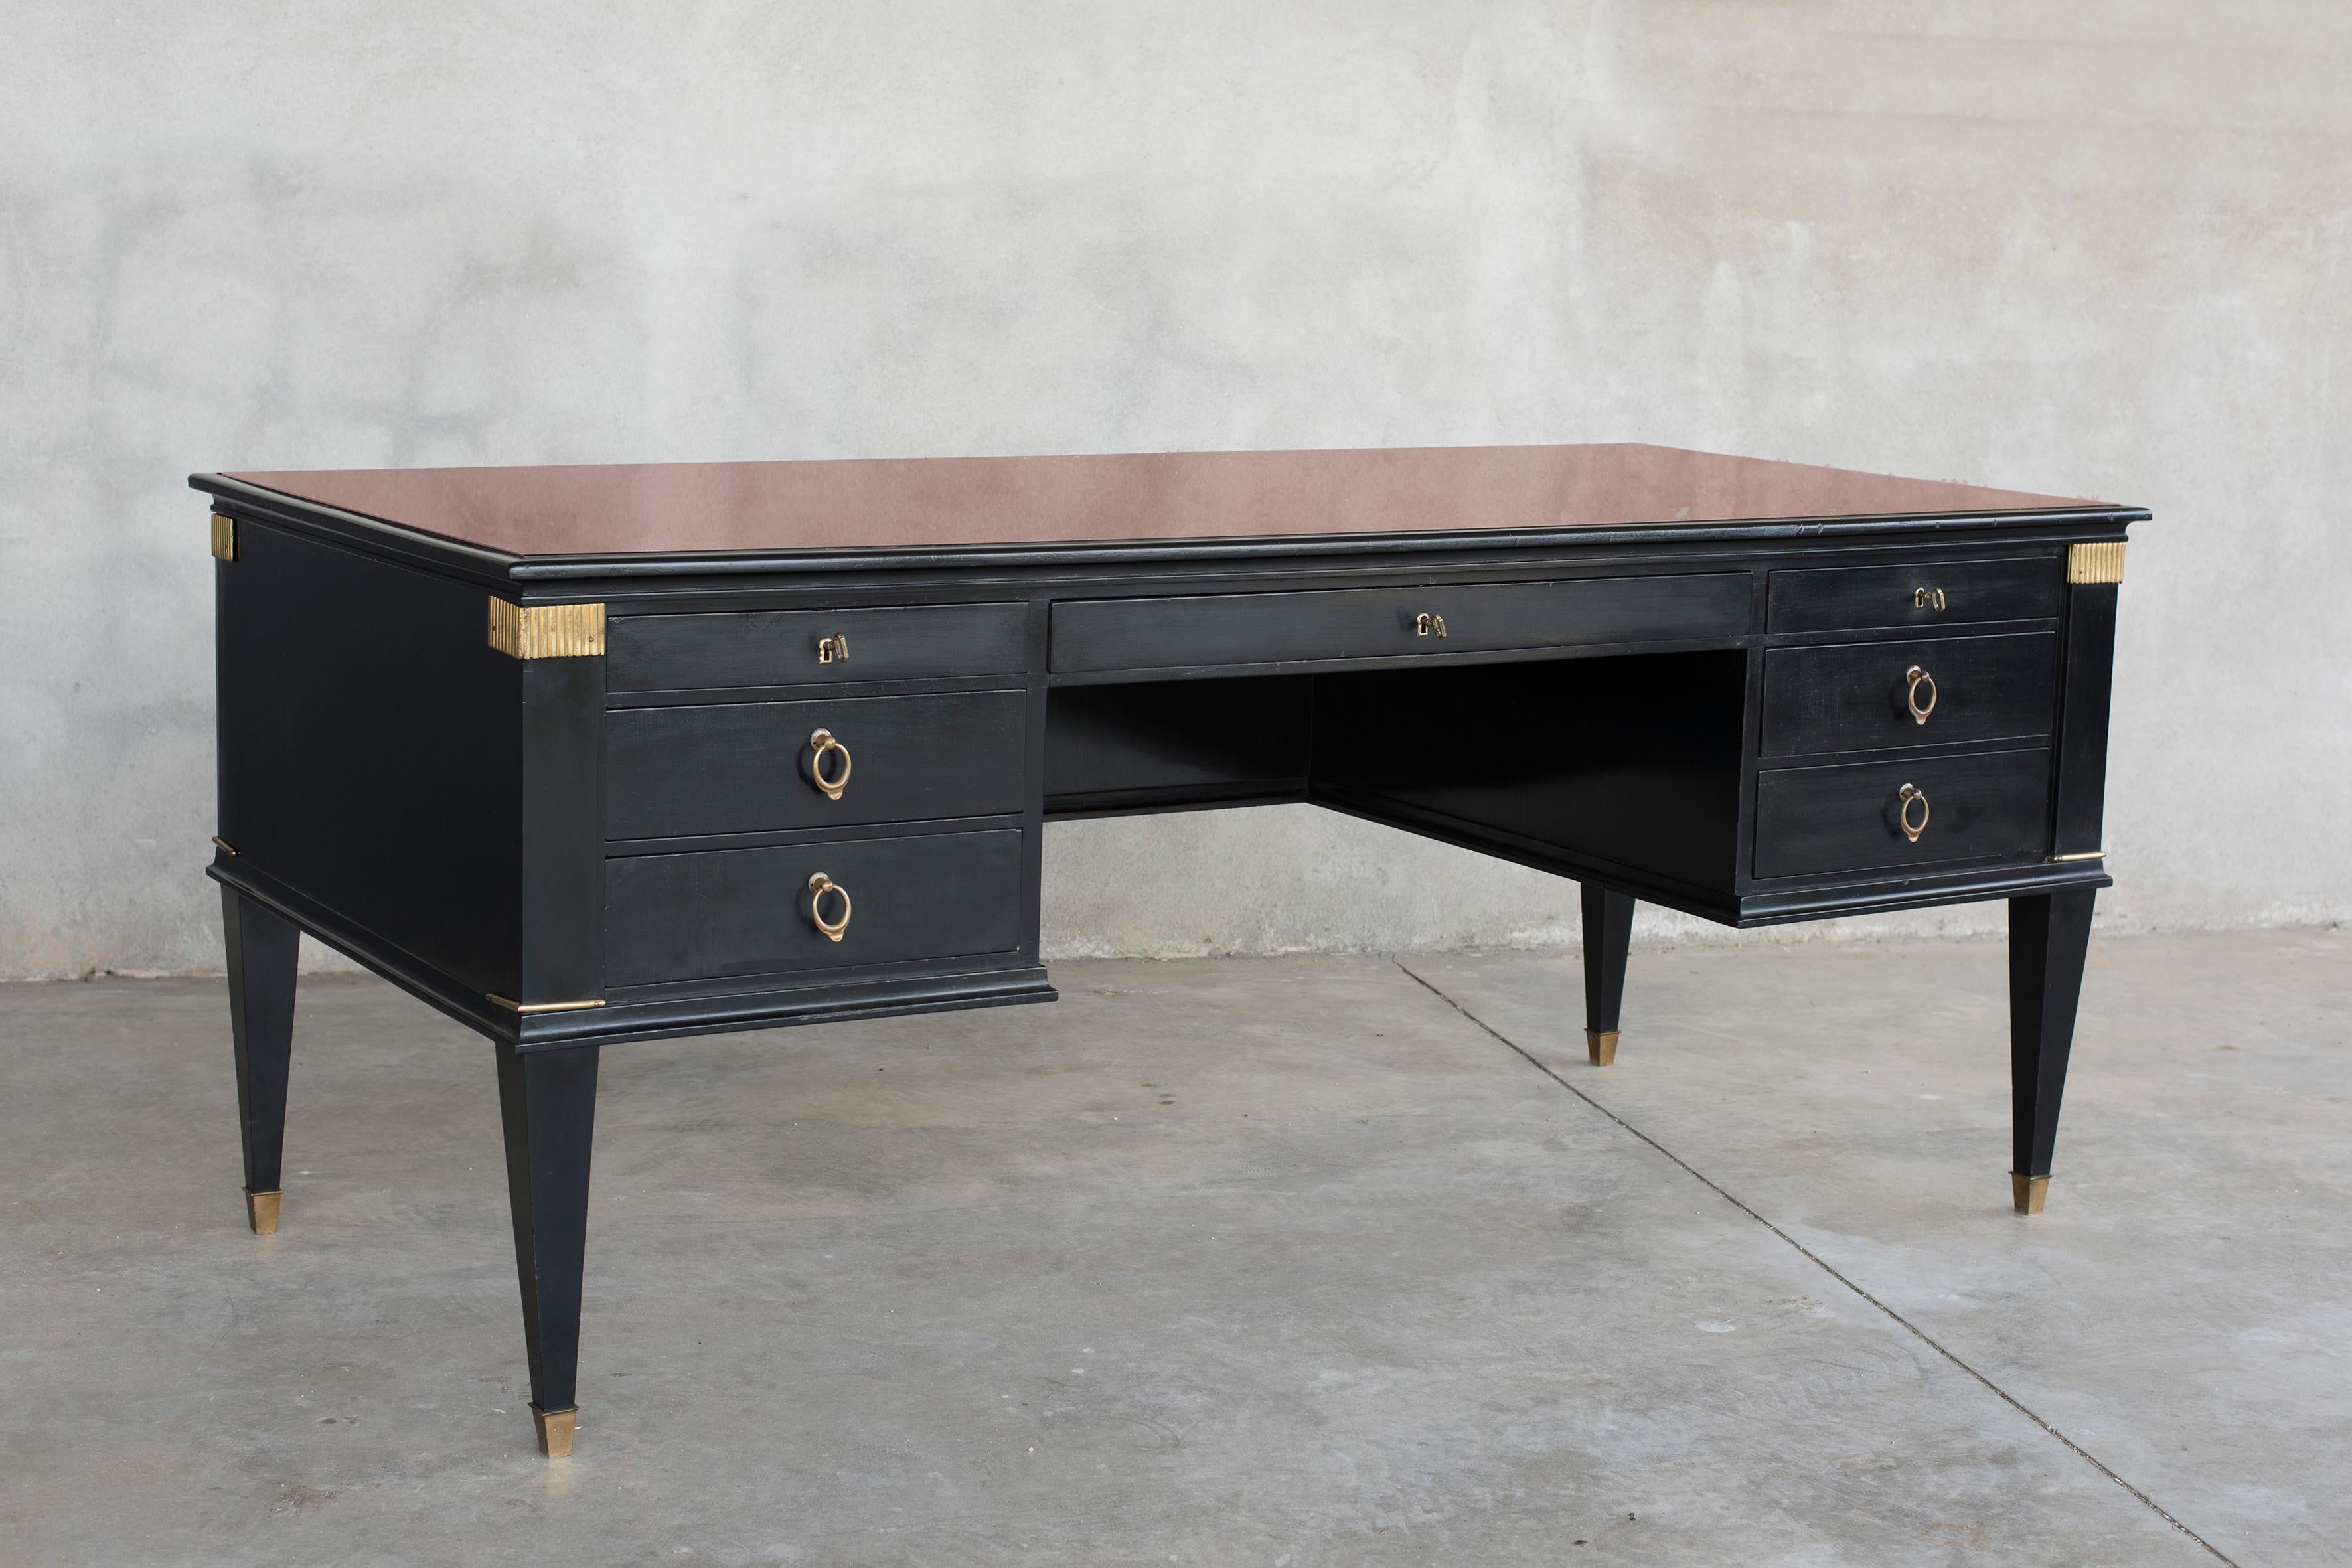 Black lacquer bronze details diplomatic desk with crystal over a leather top.
This desk features 7 drawers with bronze handles and squared bronze feet.
This piece of furniture has been realized in XX century according Louis XVI style.
Its size